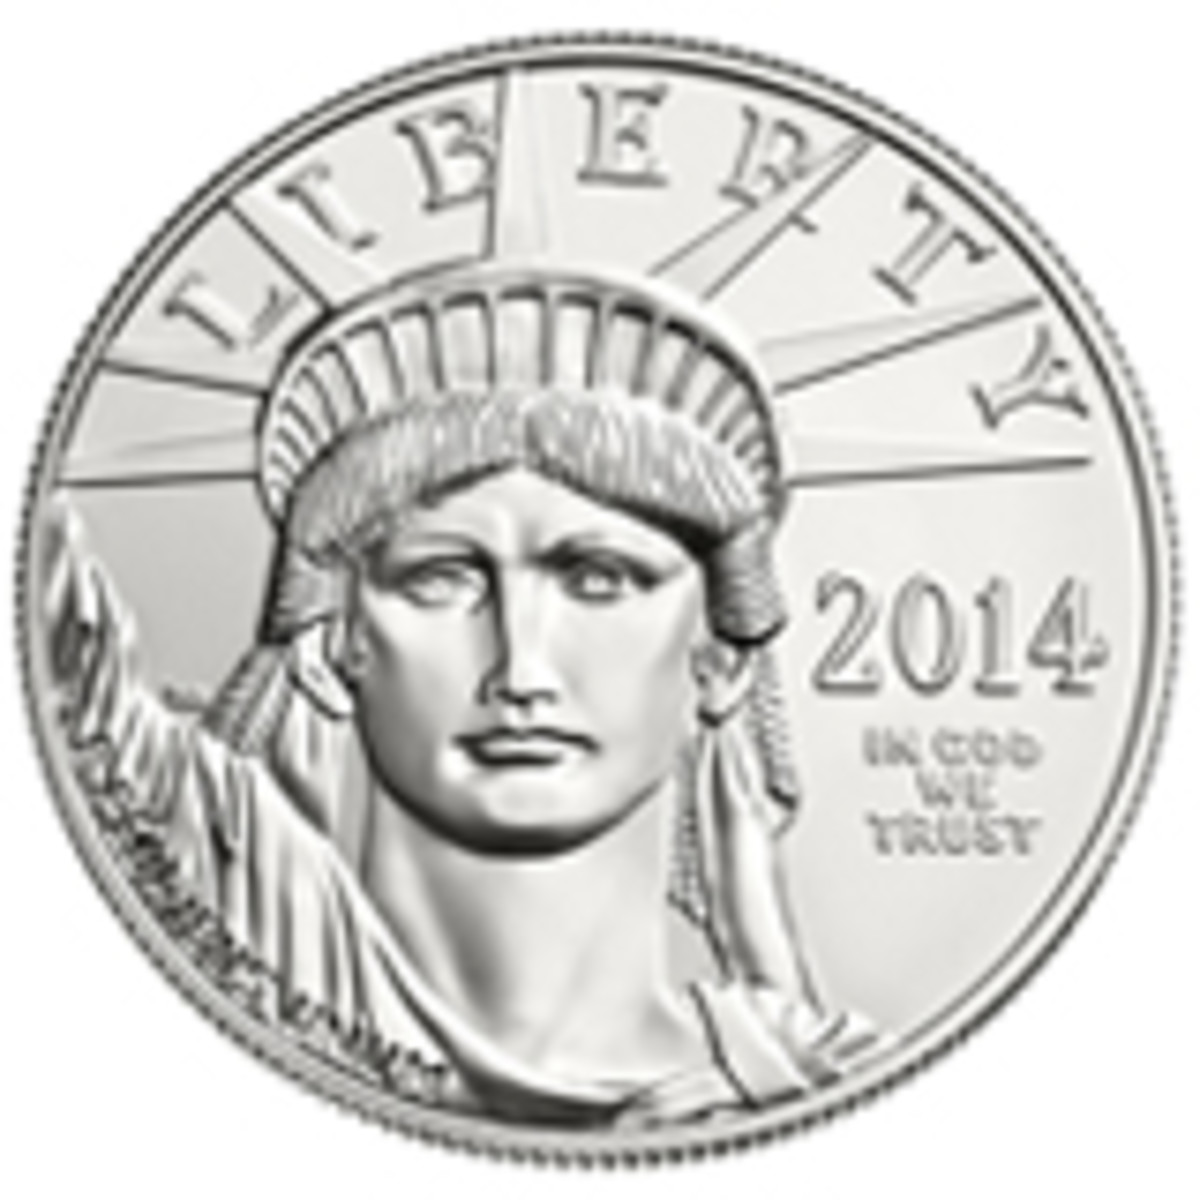 Buyers have until Oct. 1 to purchase the 2014 Platinum Eagle bullion coin.